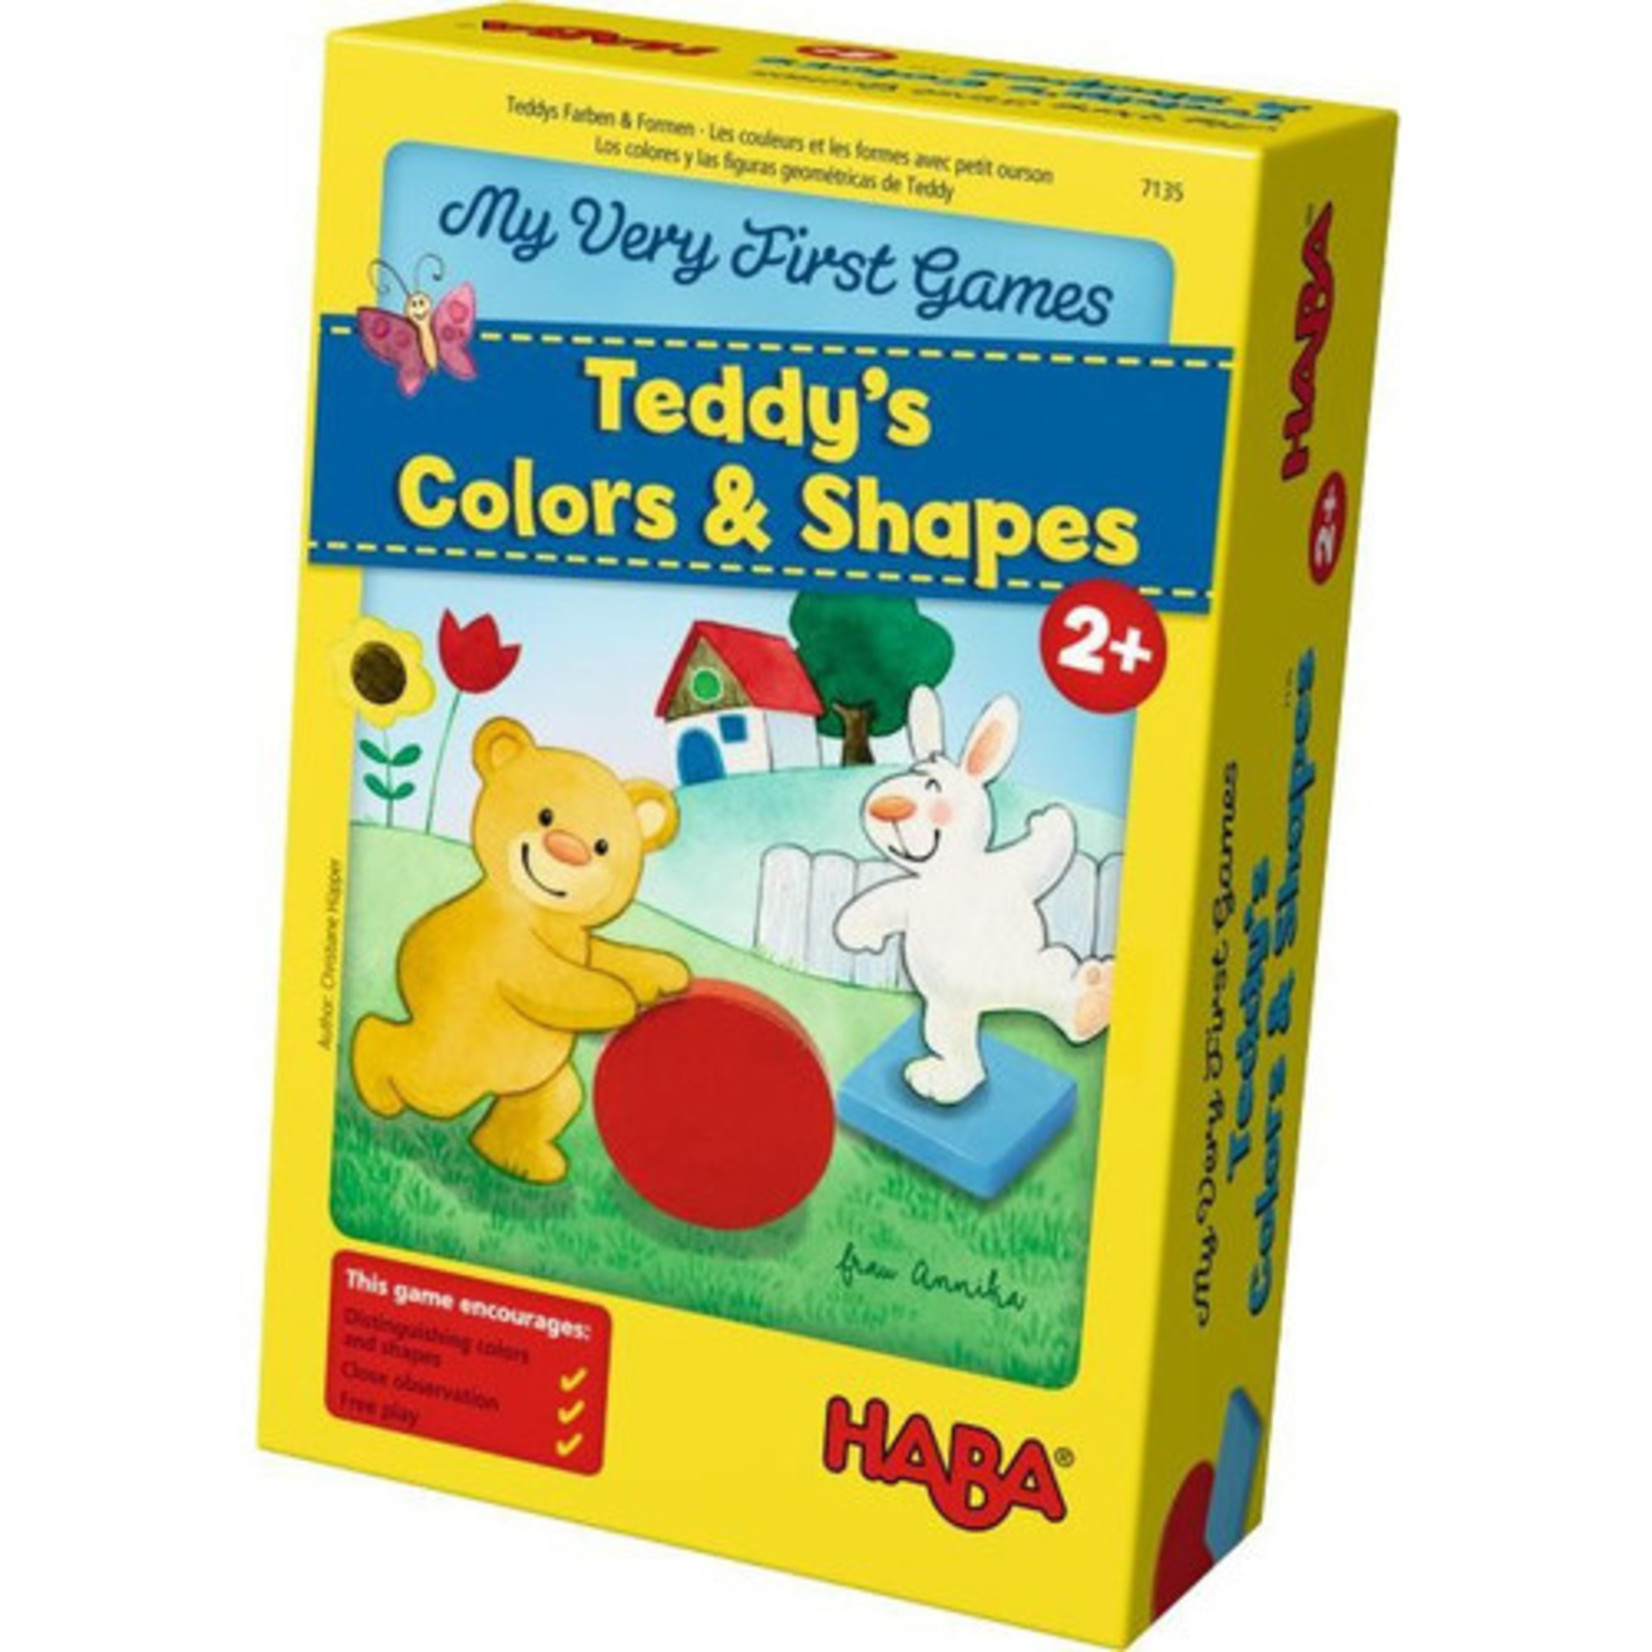 Haba Teddy's Colors and Shapes